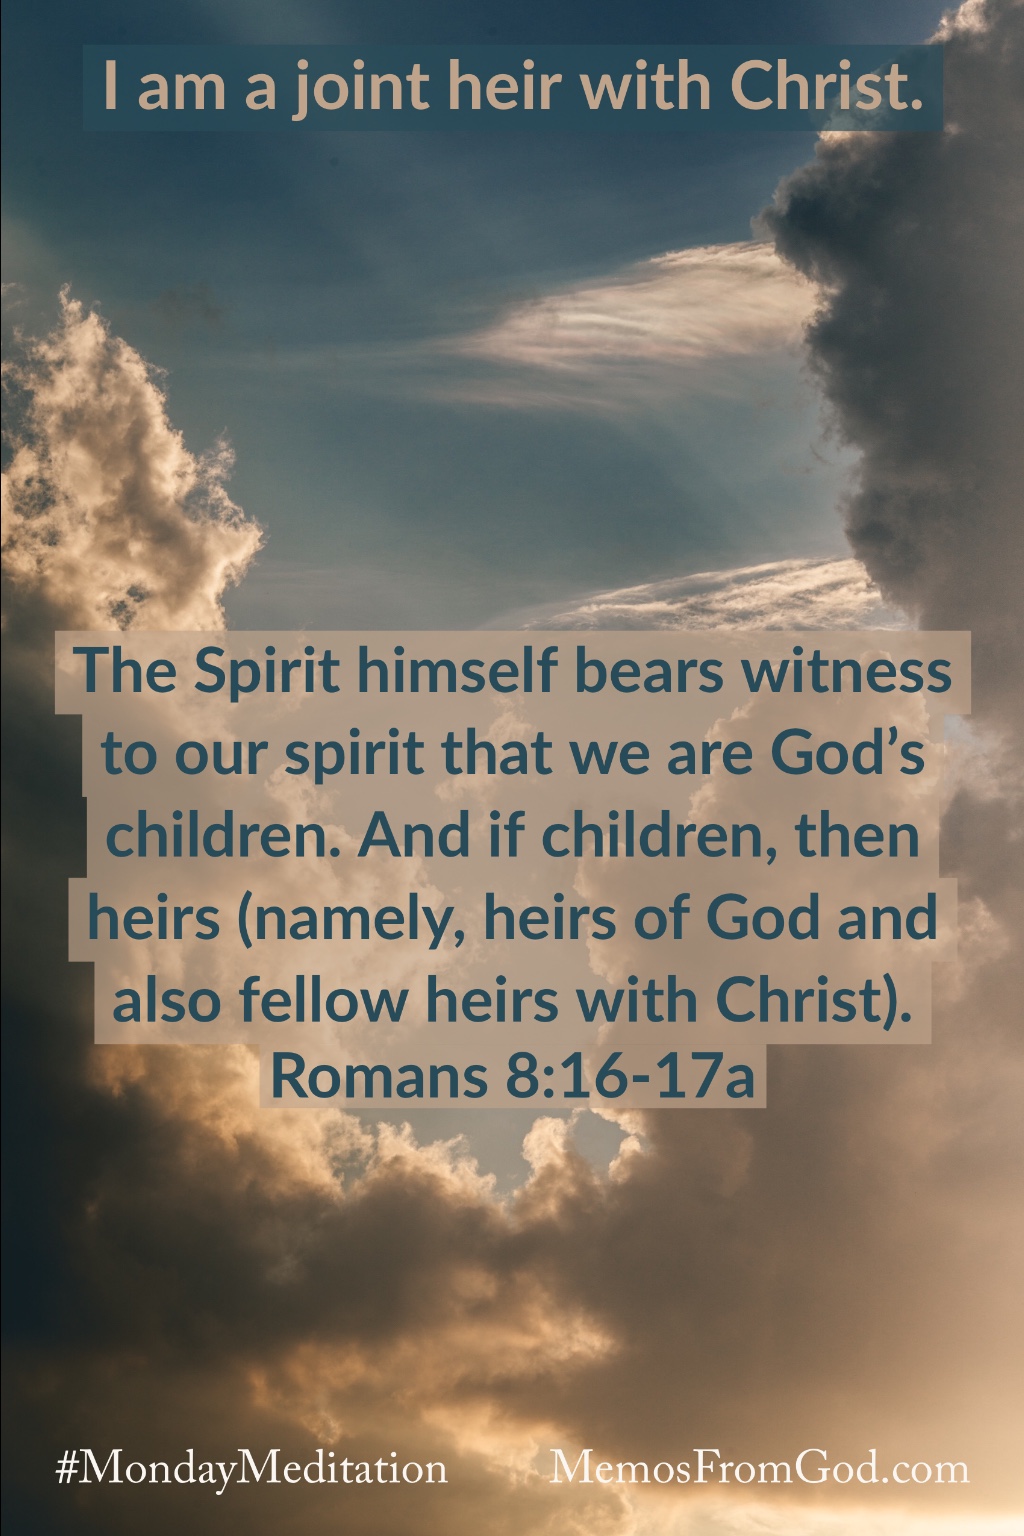 Dark clouds with bright spots in a medium blue sky. Caption: The Spirit himself bears witness to our spirit that we are God’s children. And if children, then heirs (namely, heirs of God and also fellow heirs with Christ). Romans 8:16-17a